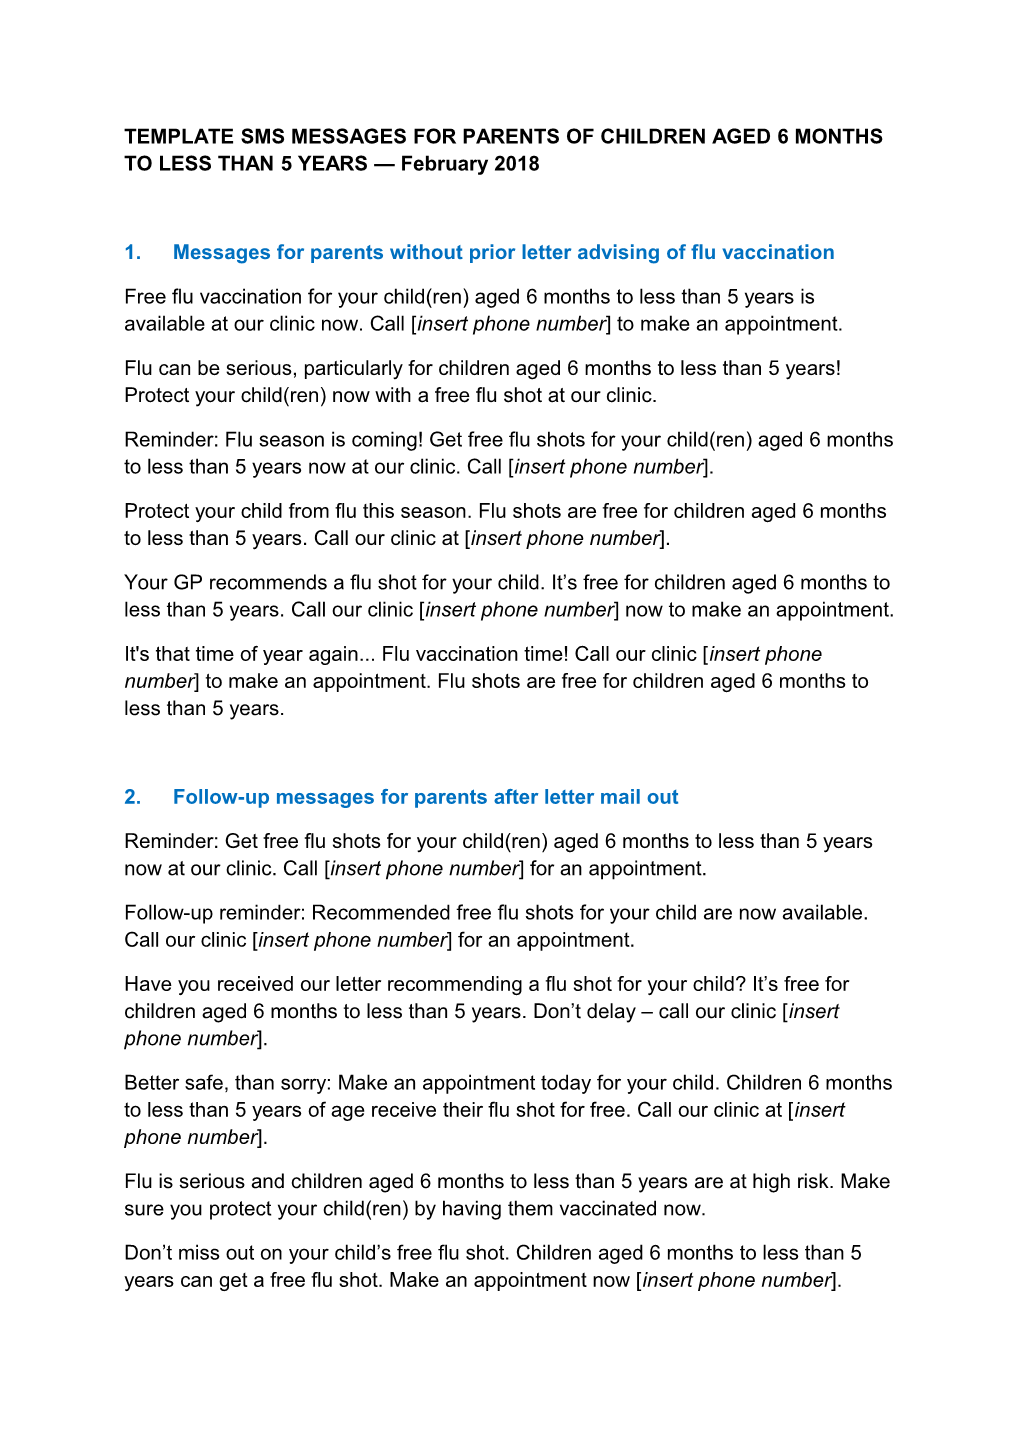 TEMPLATE SMS MESSAGES for PARENTS of CHILDREN AGED 6 MONTHS to LESS THAN 5 YEARS February 2018